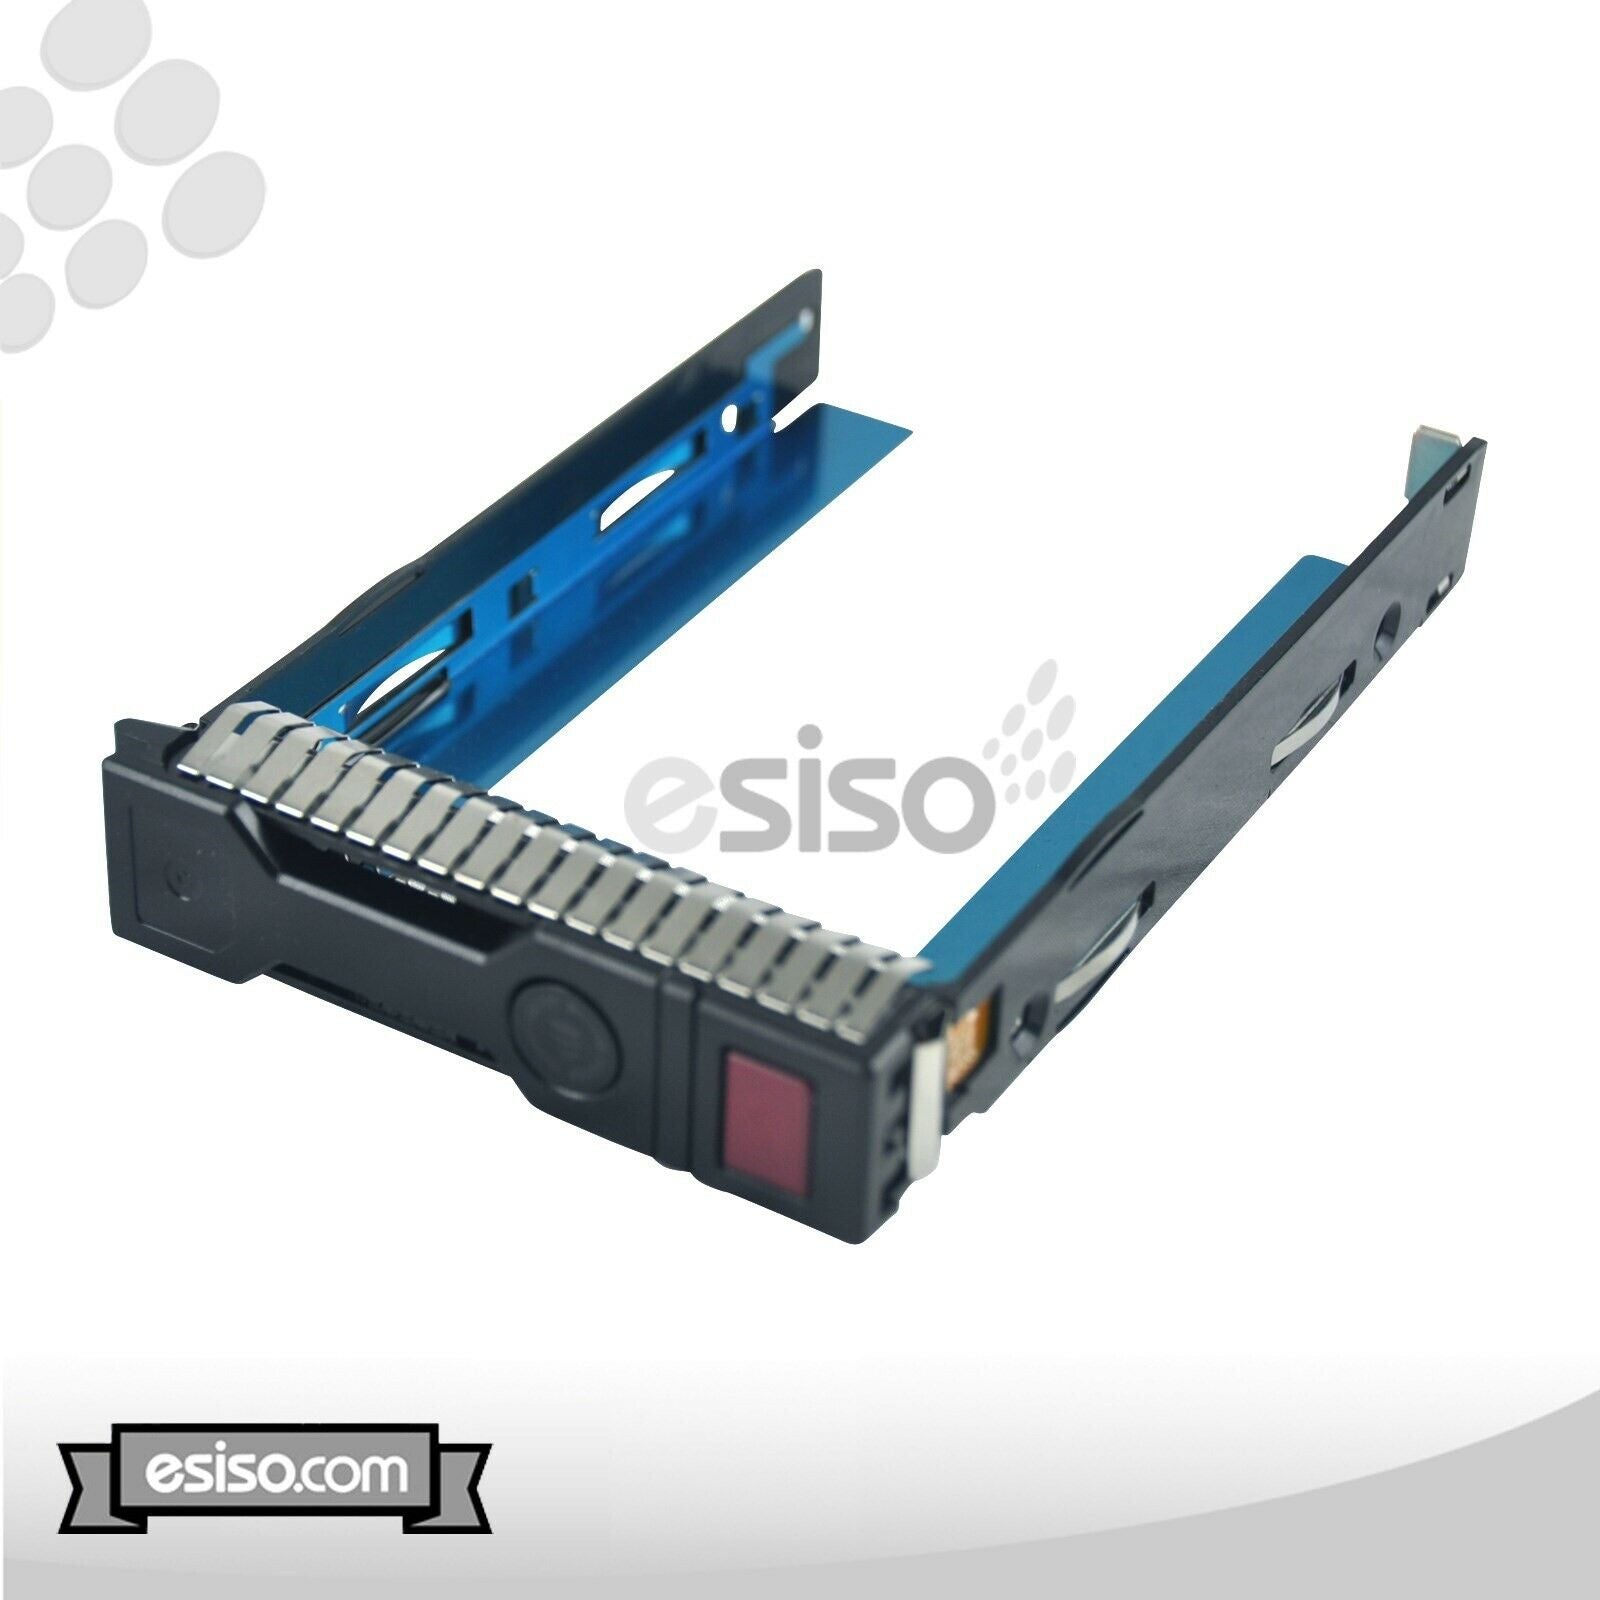 LOT OF 2 651314-001 HPE TRAY FOR 3.5'' SAS/SATA DRIVE TRAY DL560 DL385 G8 G9